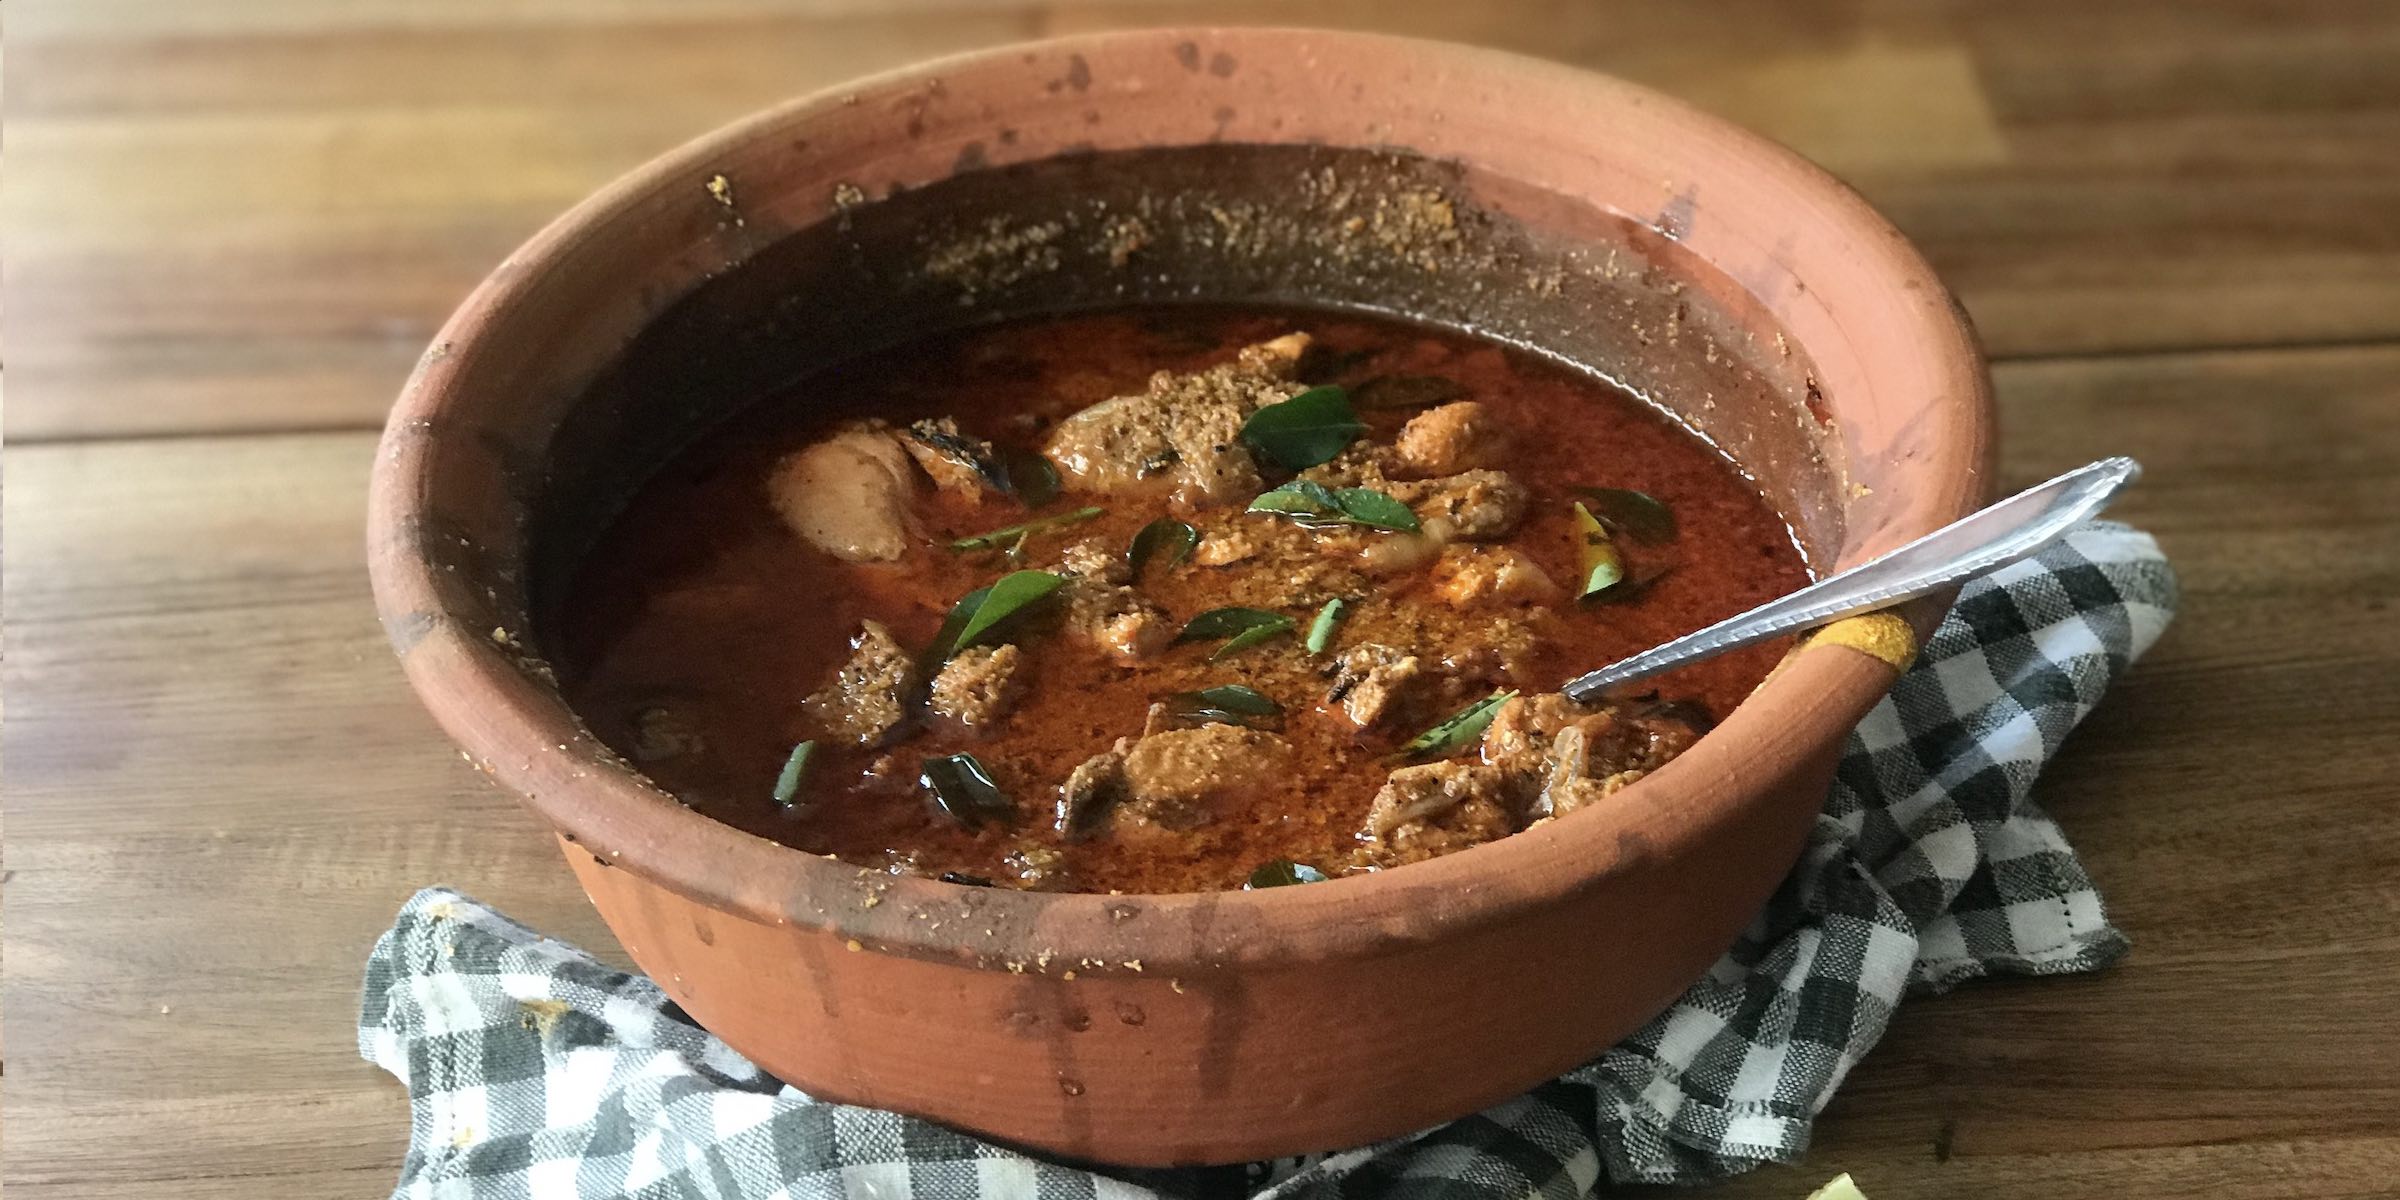 Chettinad Chicken cooked in a claypot